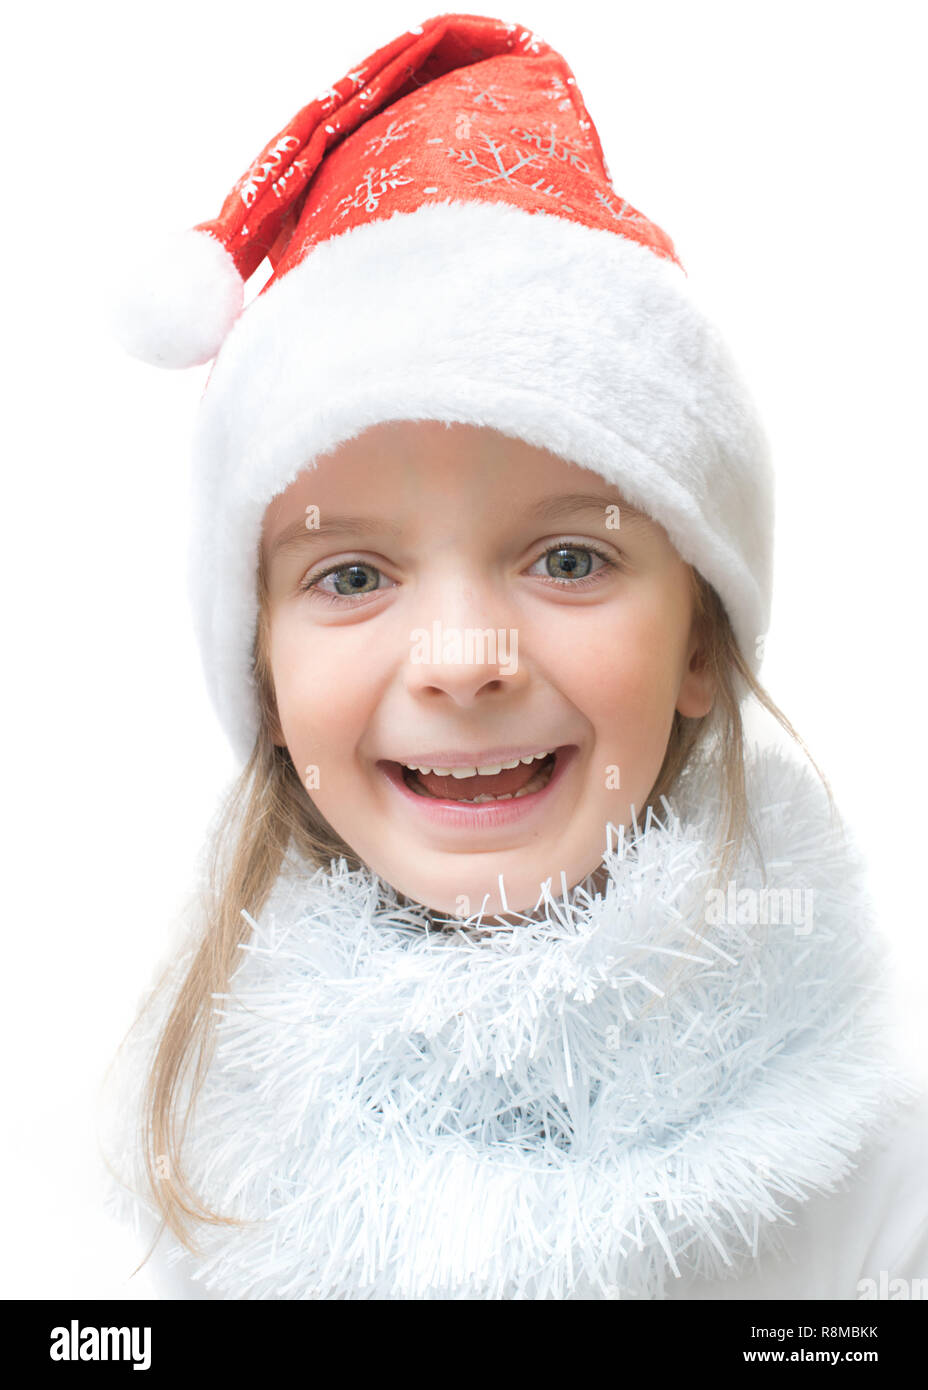 An adorable little girl, wearing a Santa Claus hat, with a happy laughing expression. Stock Photo